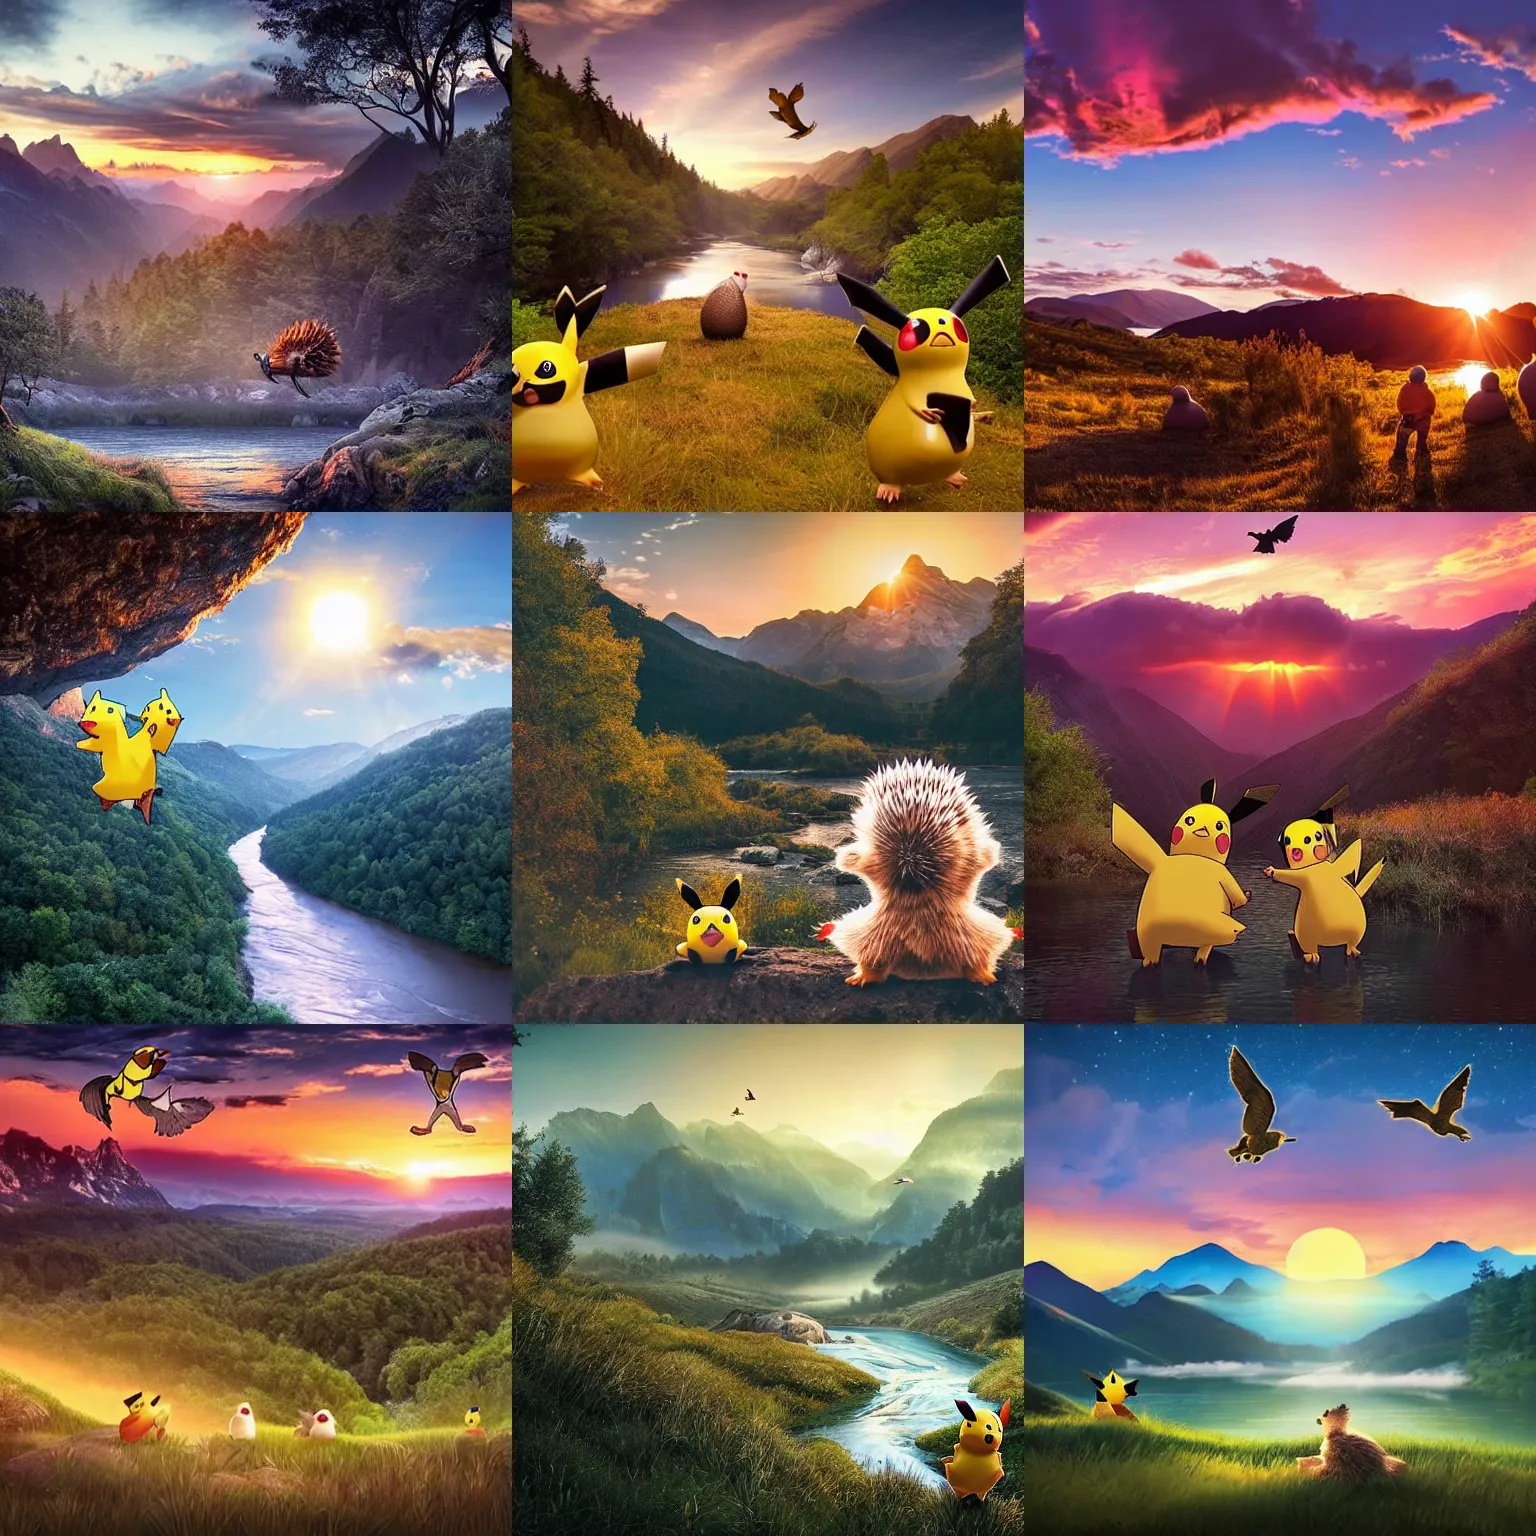 Prompt: A majestic landscape featuring a river, mountains and a forest. A group of birds is flying in the sky. There is an pikachu with a hedgehog standing next to him. They are both staring at the sunset. Cinematic, very beautiful, award winning photo